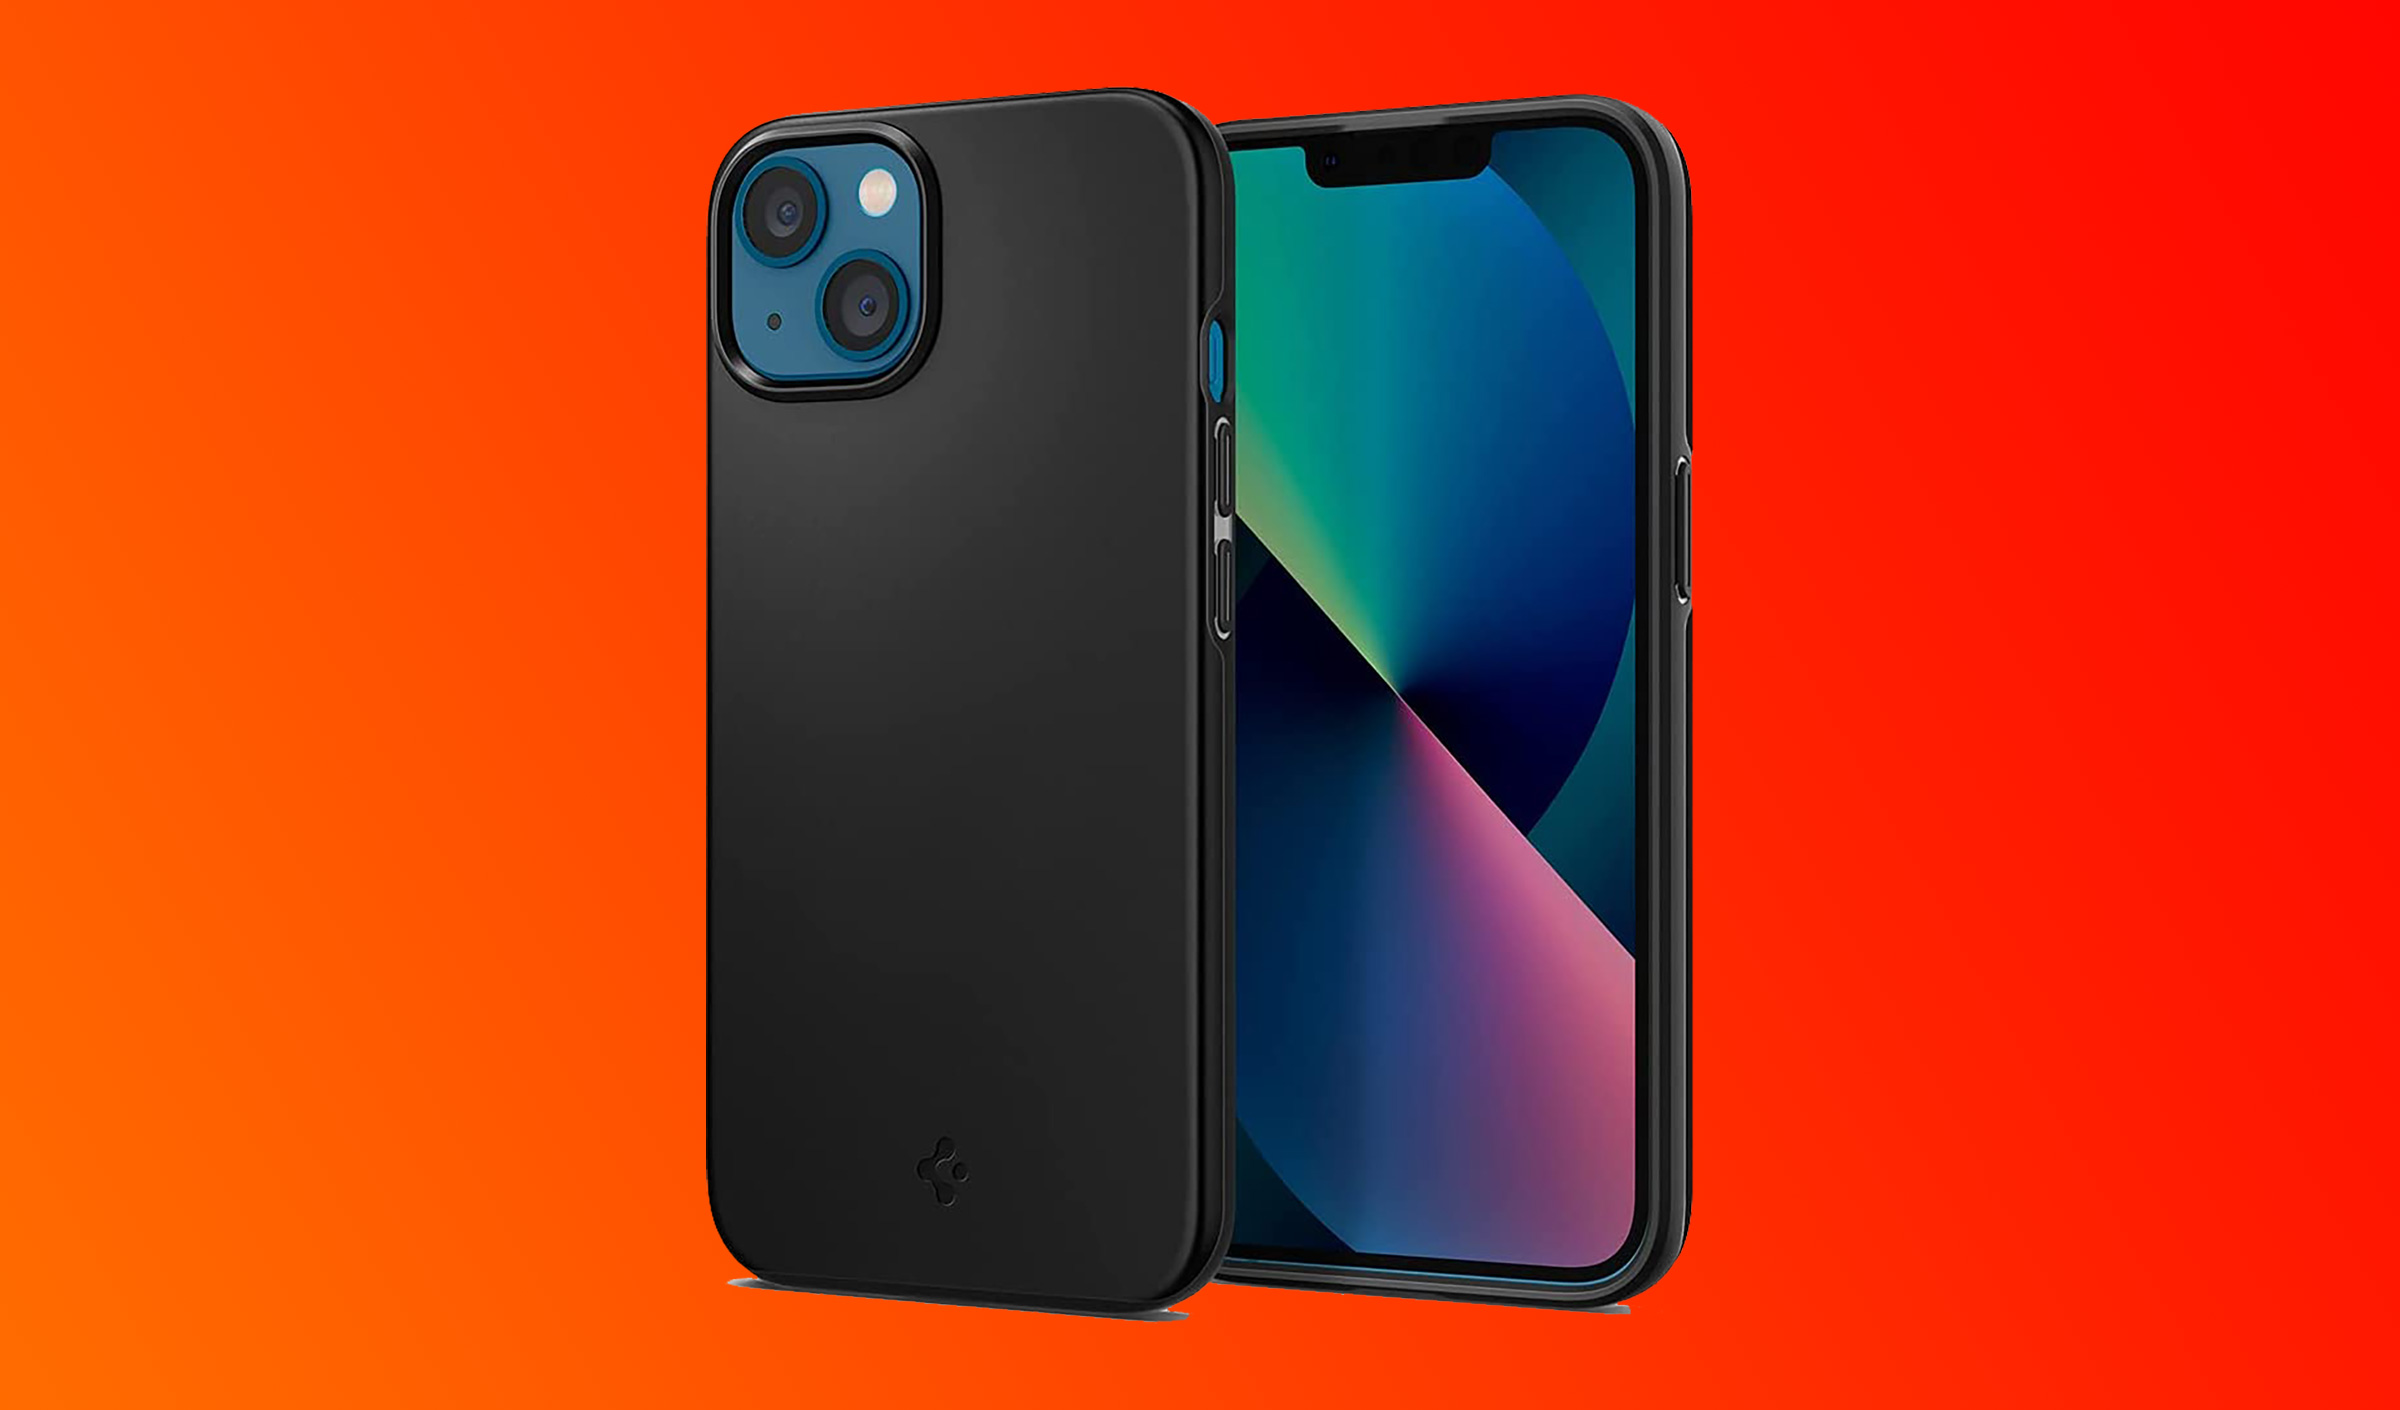 Checking out Spigen's iPhone 13 Pro case and accessory lineup